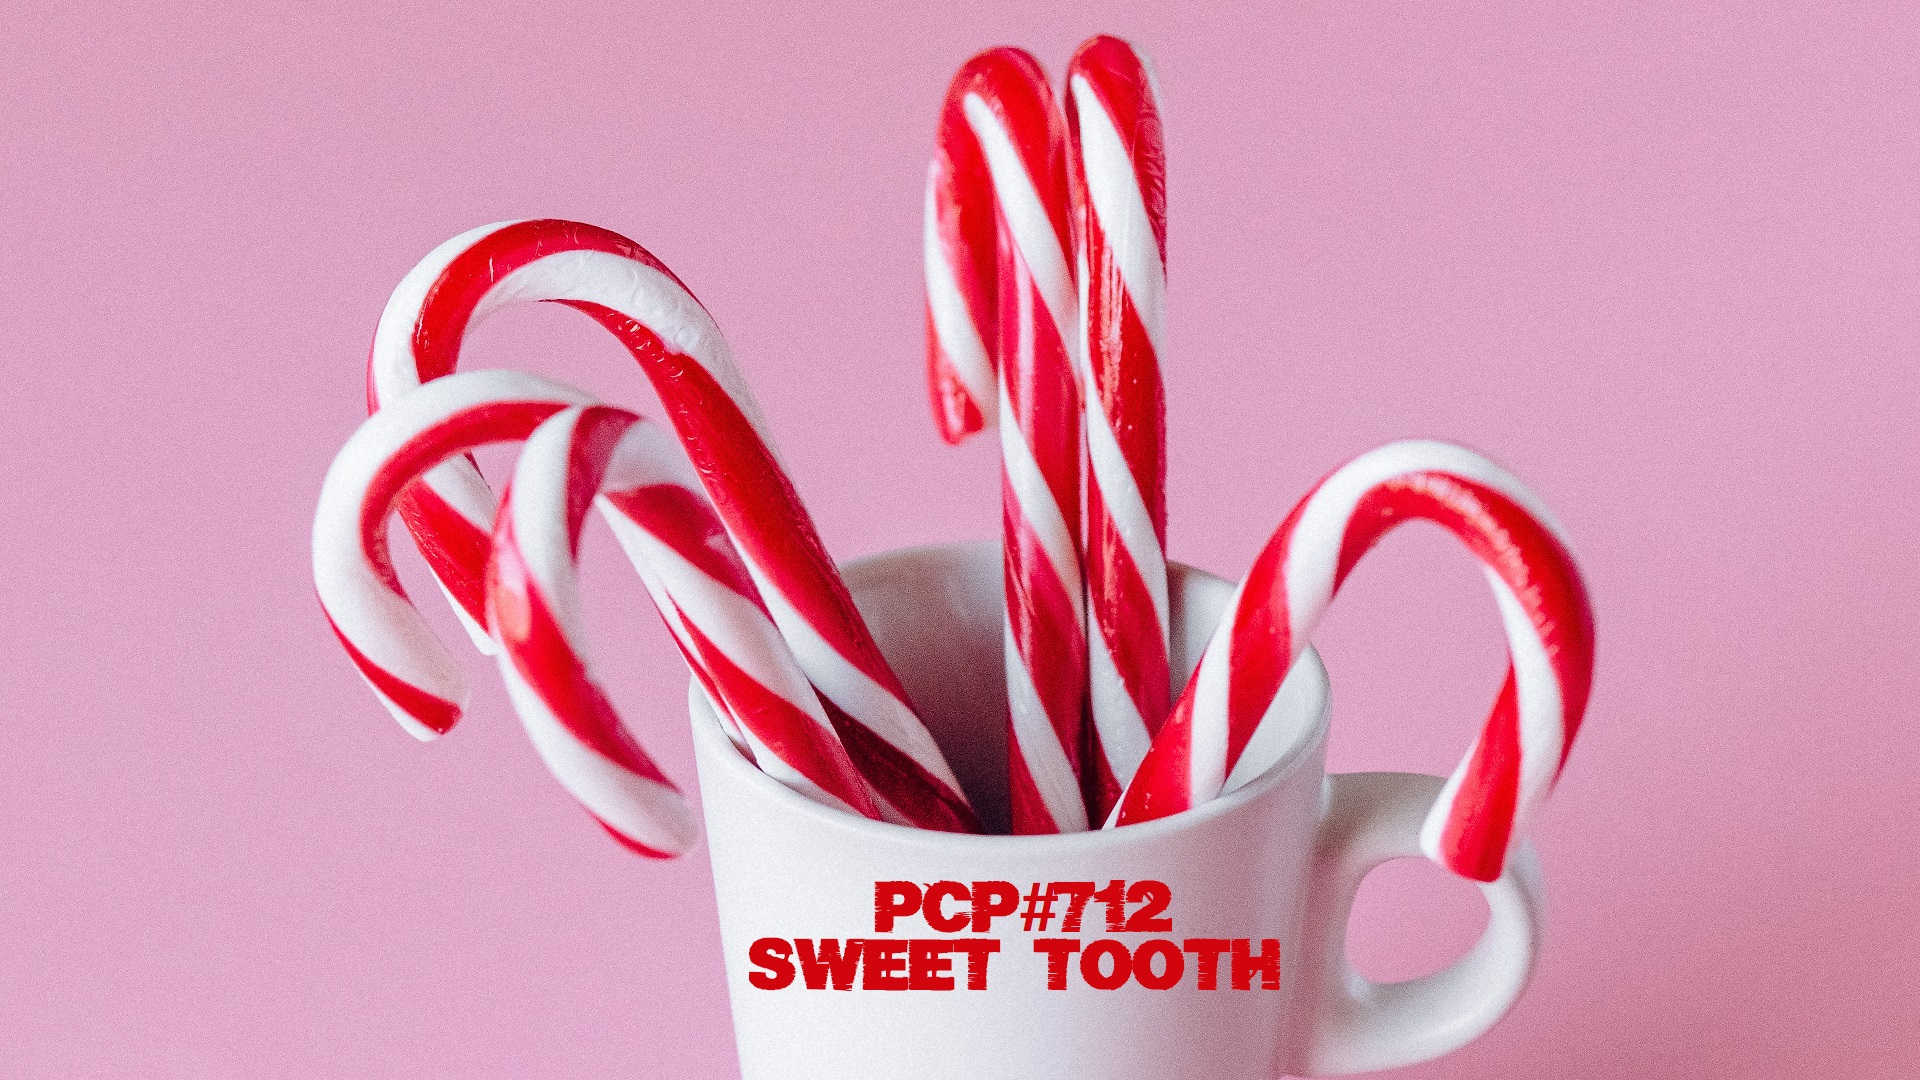 PCP#712... Sweet Tooth.....